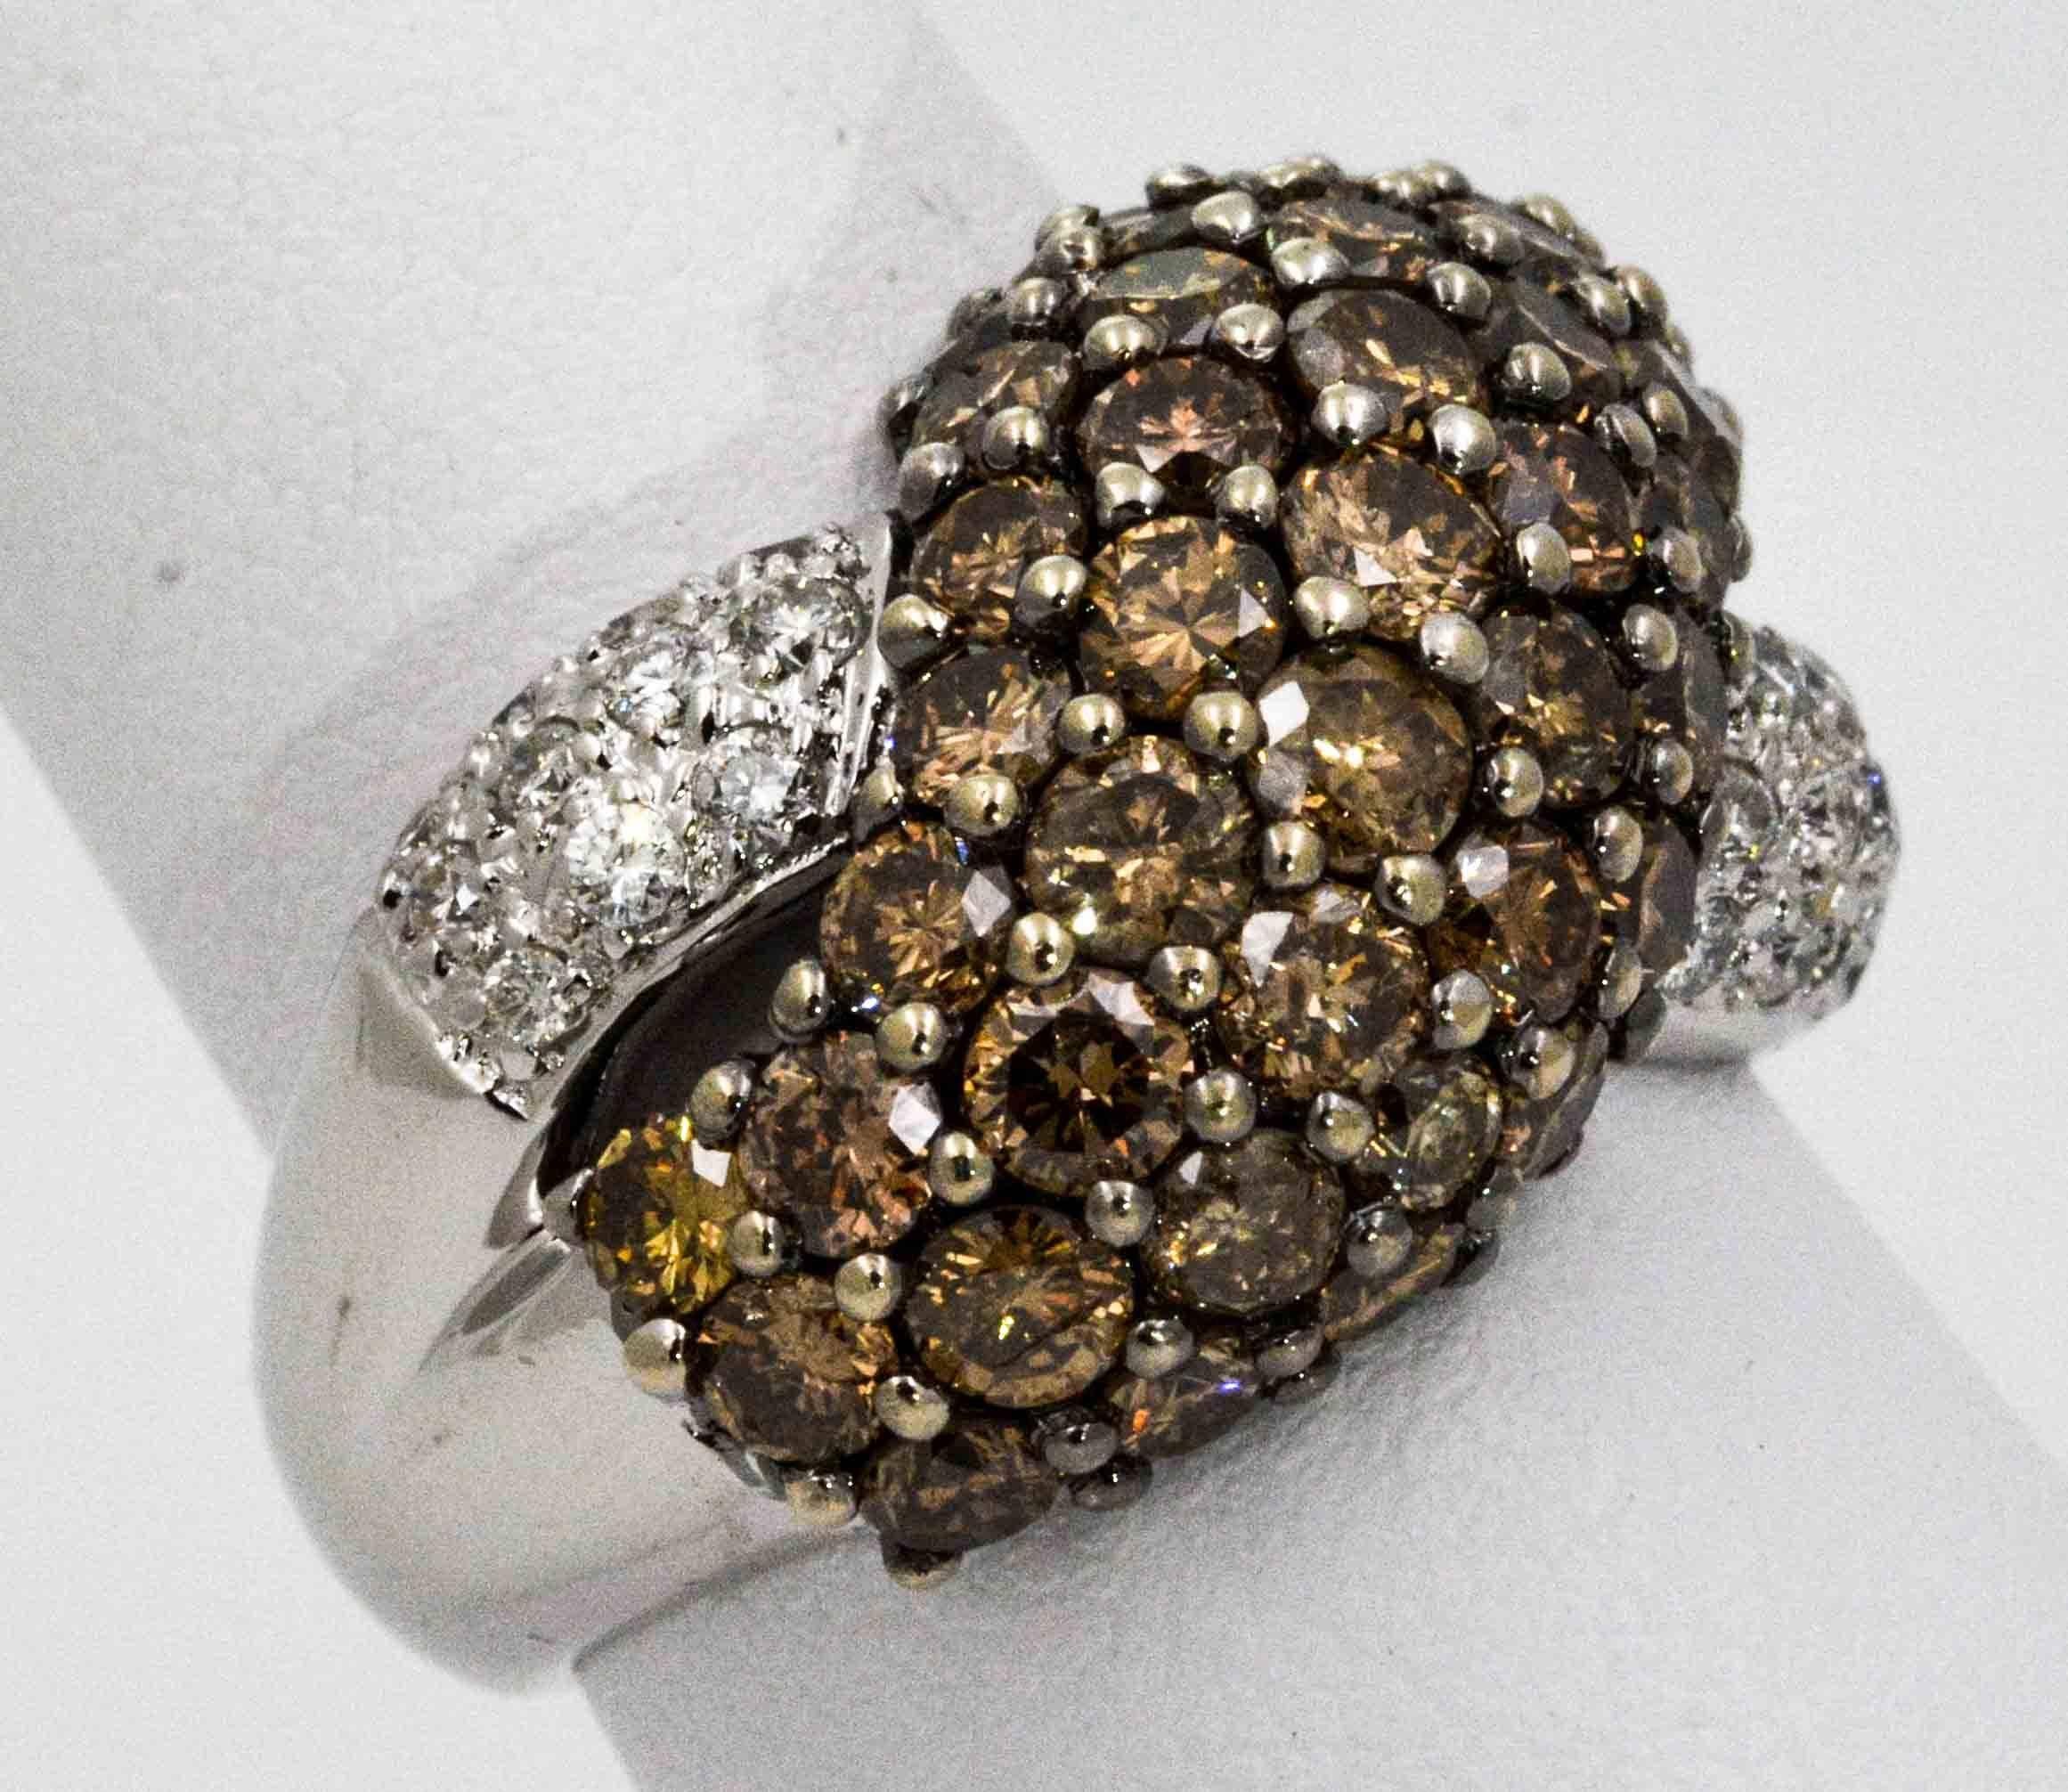 A ring with chocolate diamonds swirling over white diamonds ring is delicious to behold. This 18 karat white gold crossover ring is set with 42 brown round brilliant cut diamonds weighing 4.20 carats (SI-I clarity), along with 22 white round